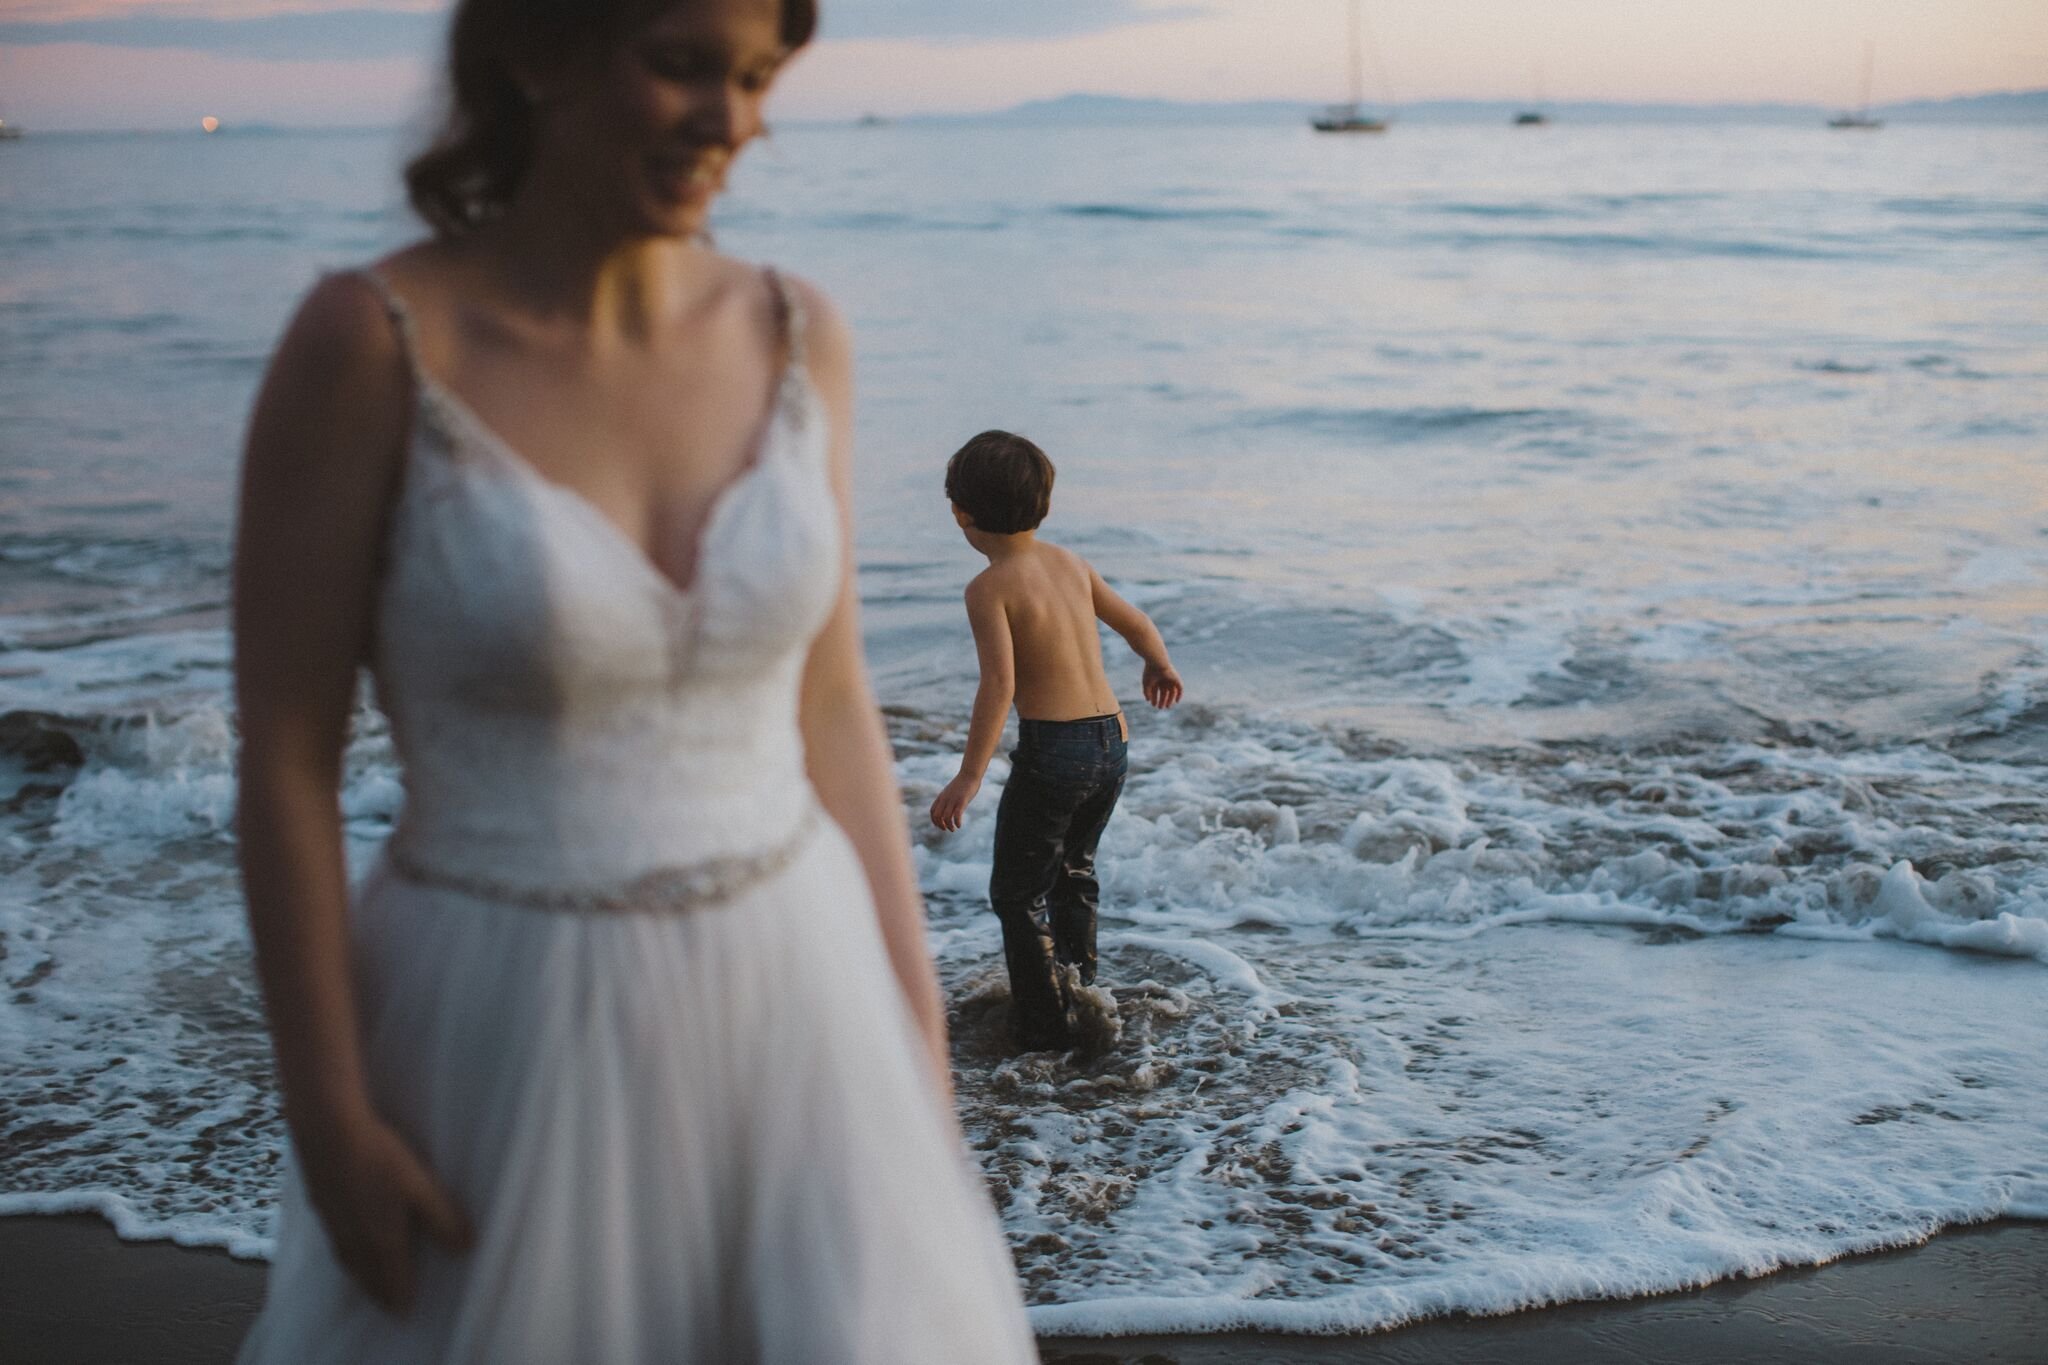 www.santabarbawedding.com | Venue: Santa Barbara Courthouse | Photography: Ryanne Bee Photography | Officiant: Santa Barbara Classic Weddings | Bride and Child Playing in the Sea